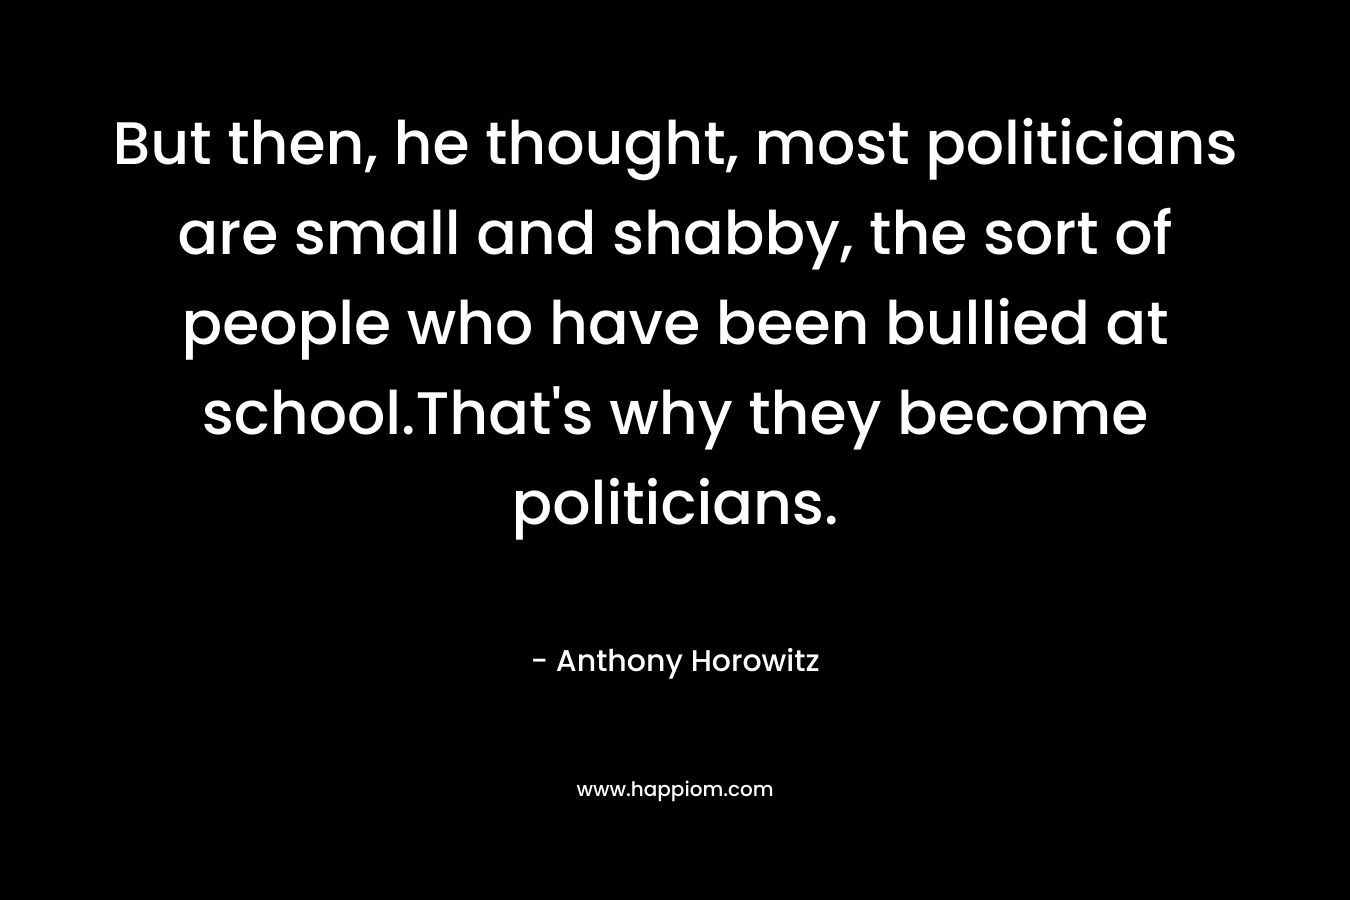 But then, he thought, most politicians are small and shabby, the sort of people who have been bullied at school.That's why they become politicians.